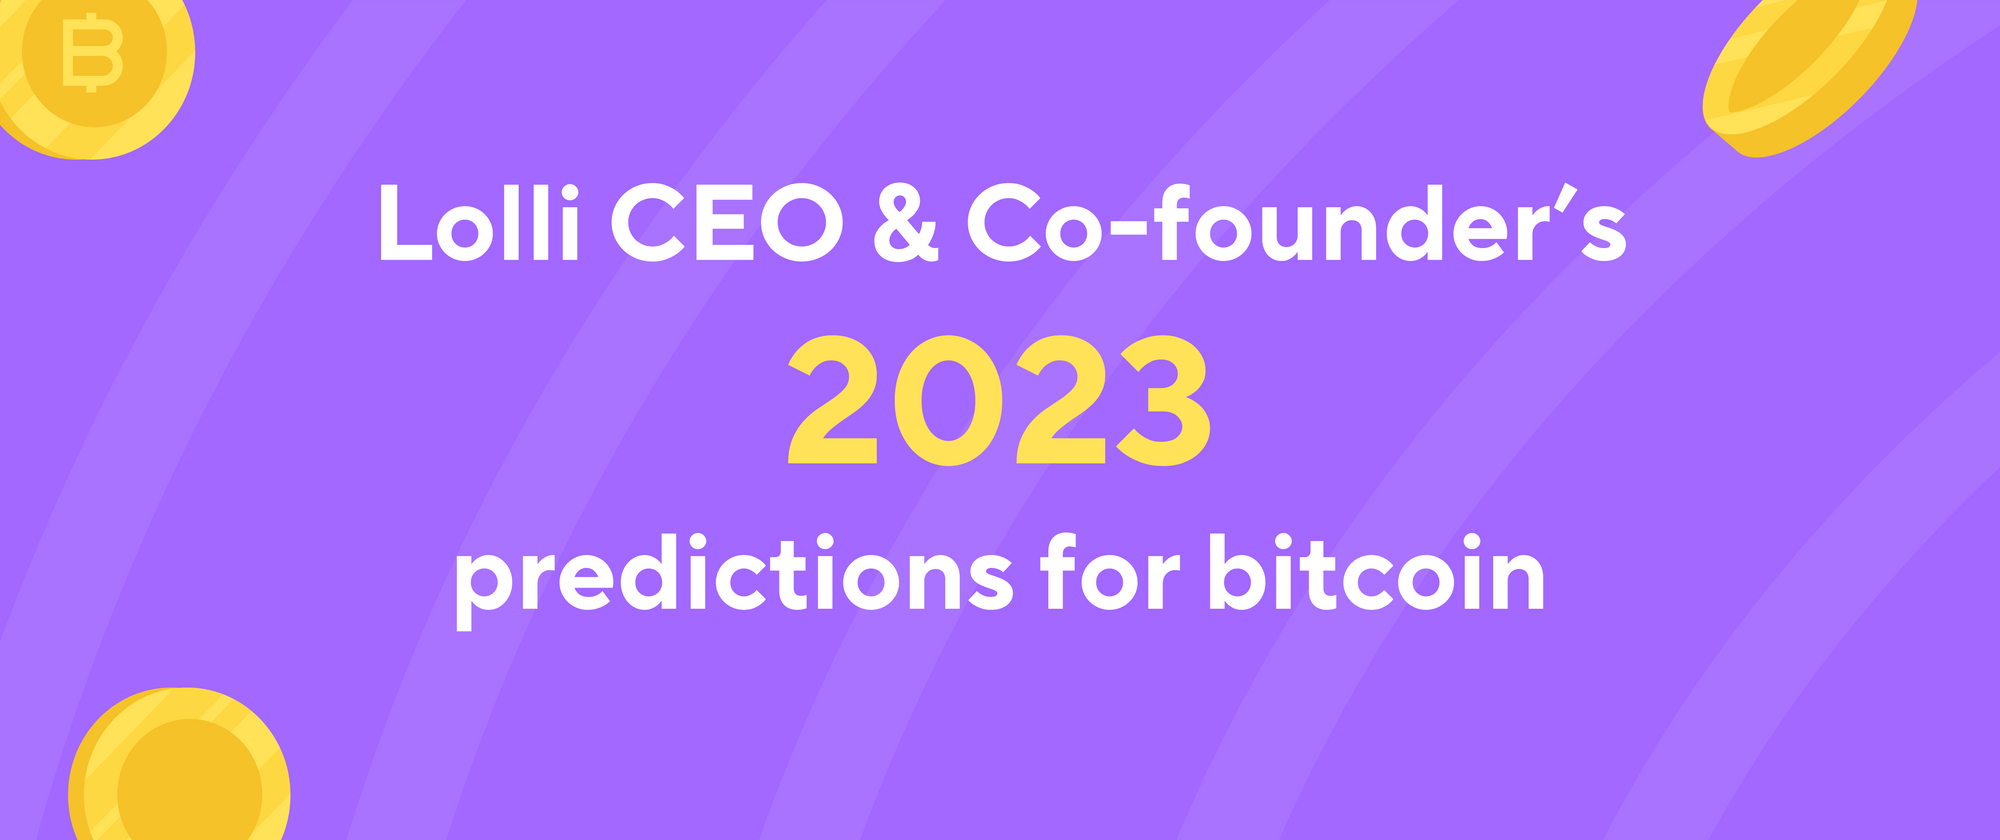 2023 Trend Predictions: Innovation on Bitcoin, Wall Street, and More